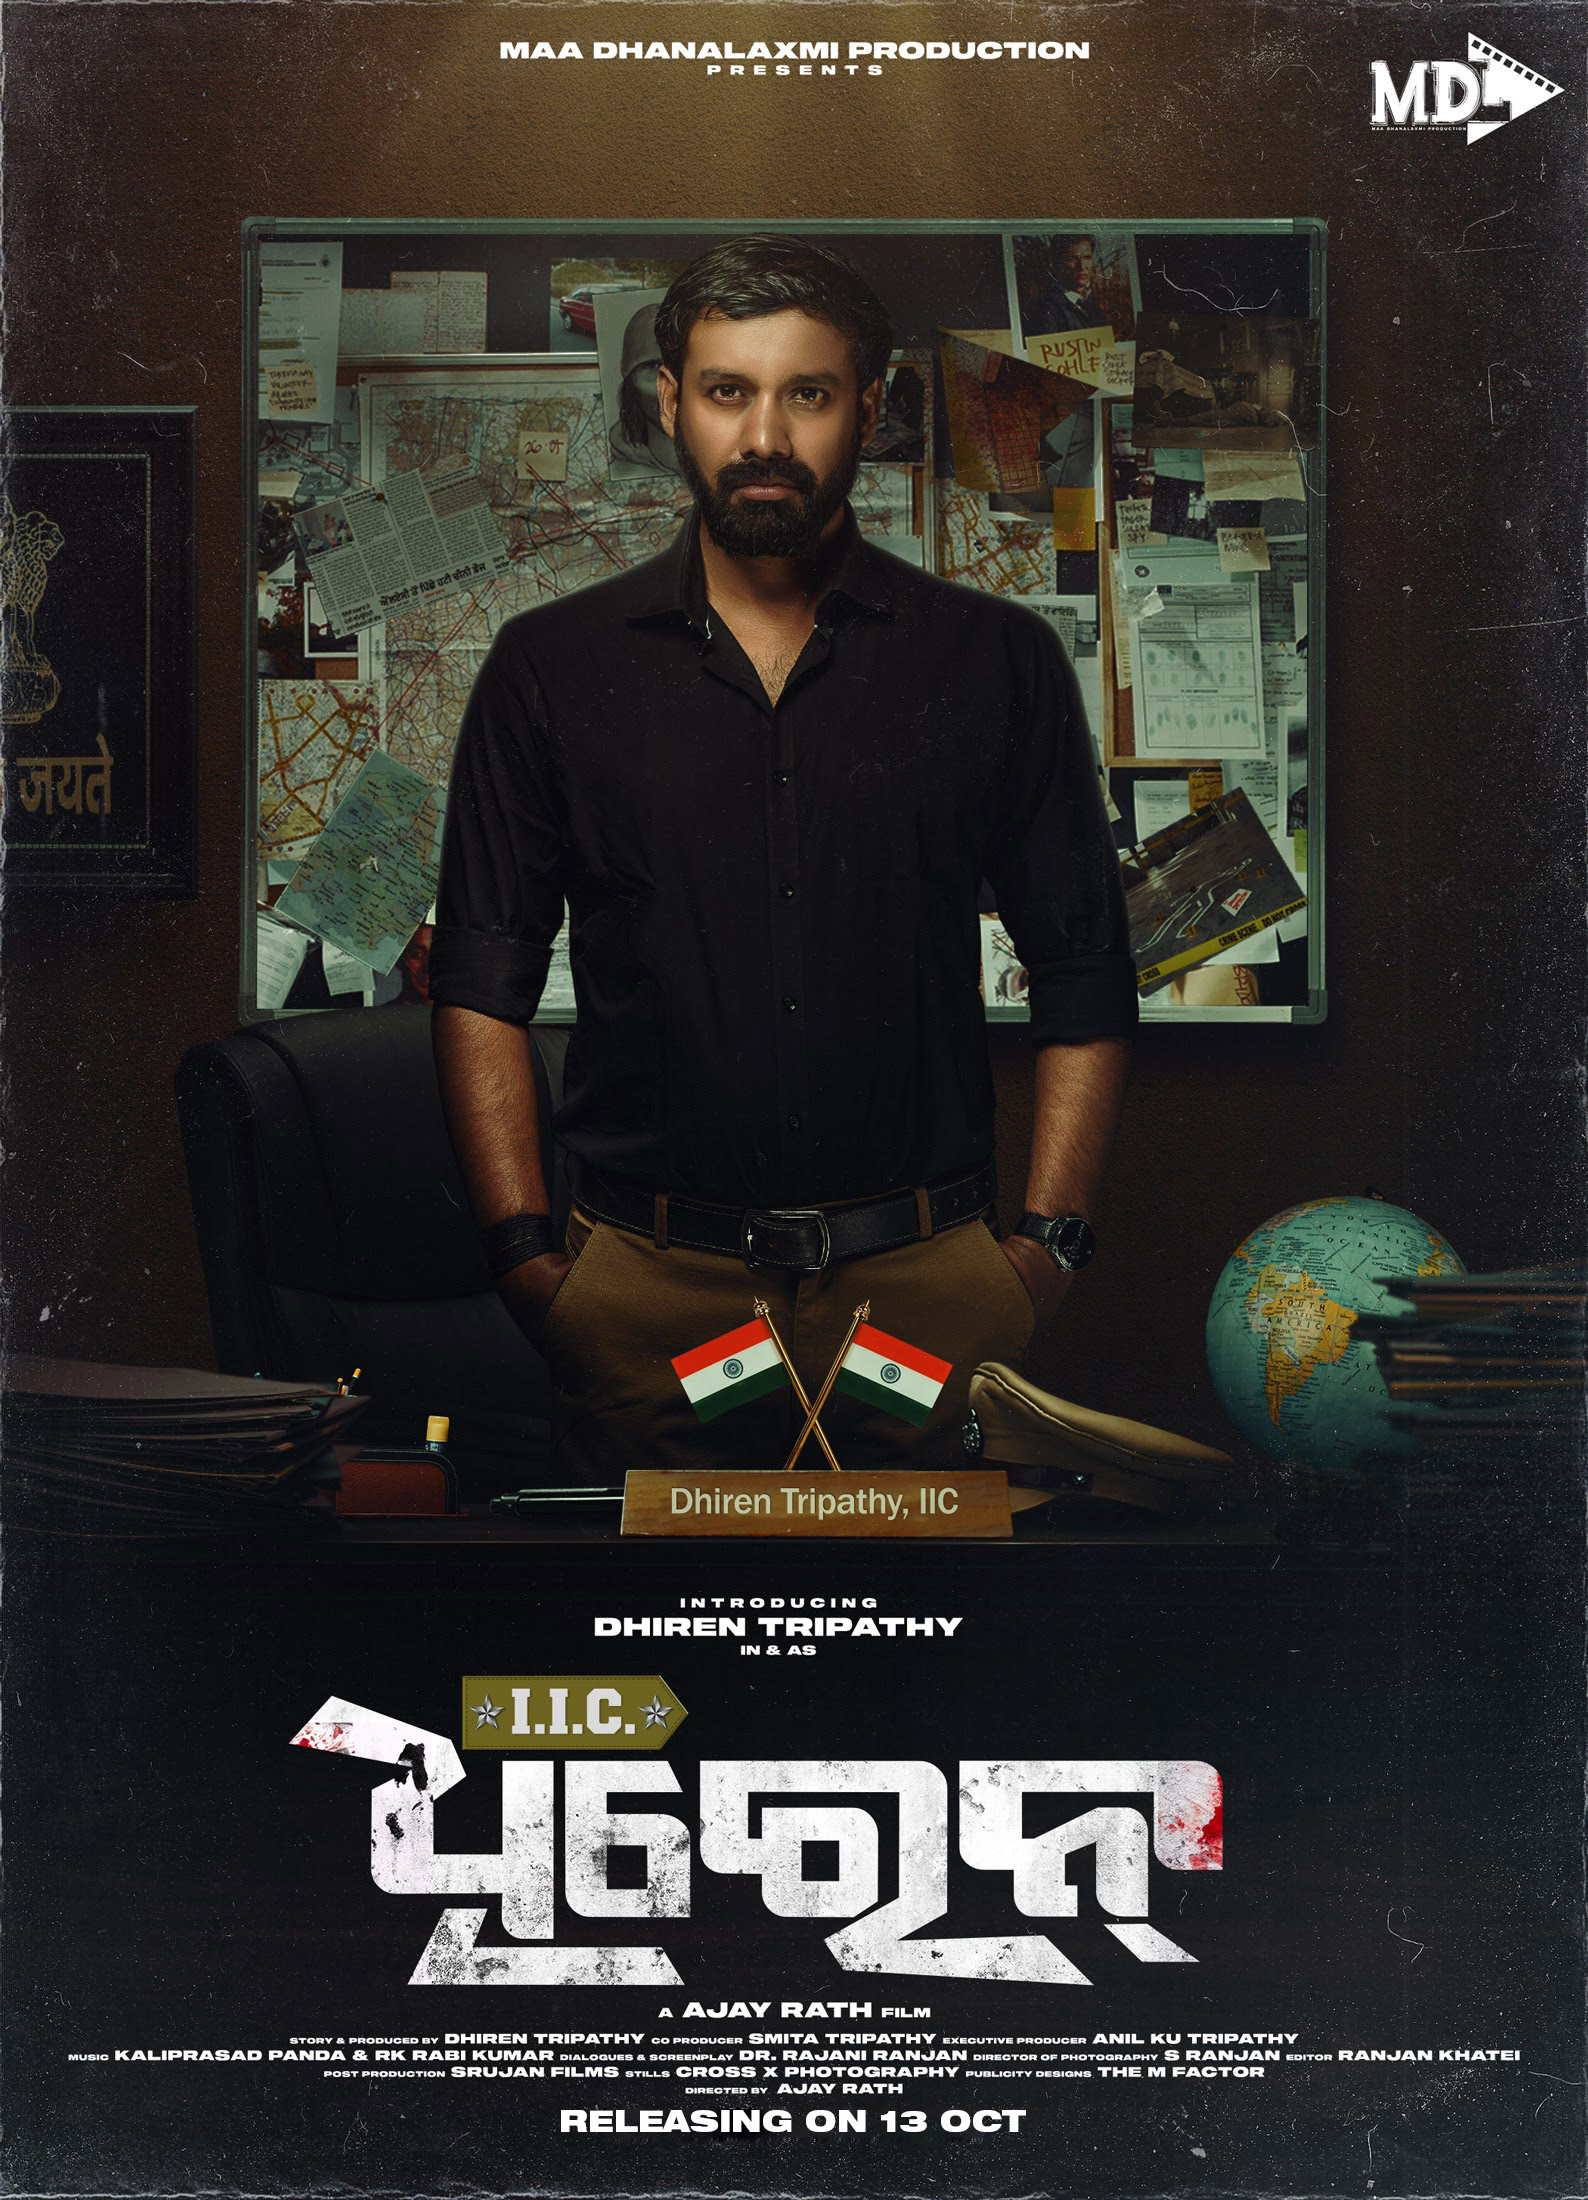 'IIC Dhiren' official poster